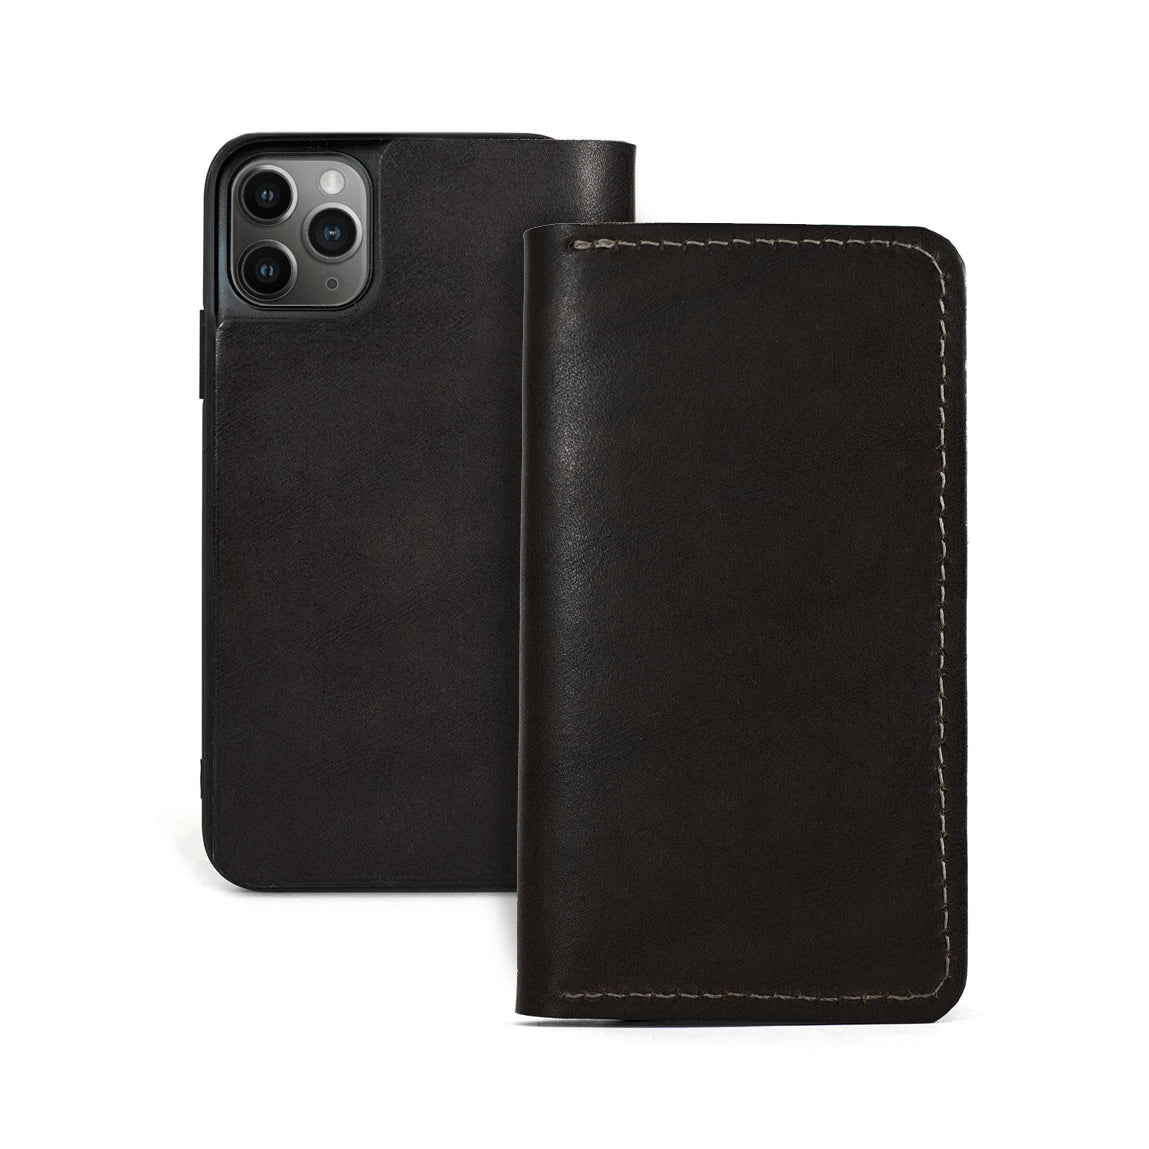 iPhone X / XS Wallet Case - Shop Cell Phone Wallet Cases